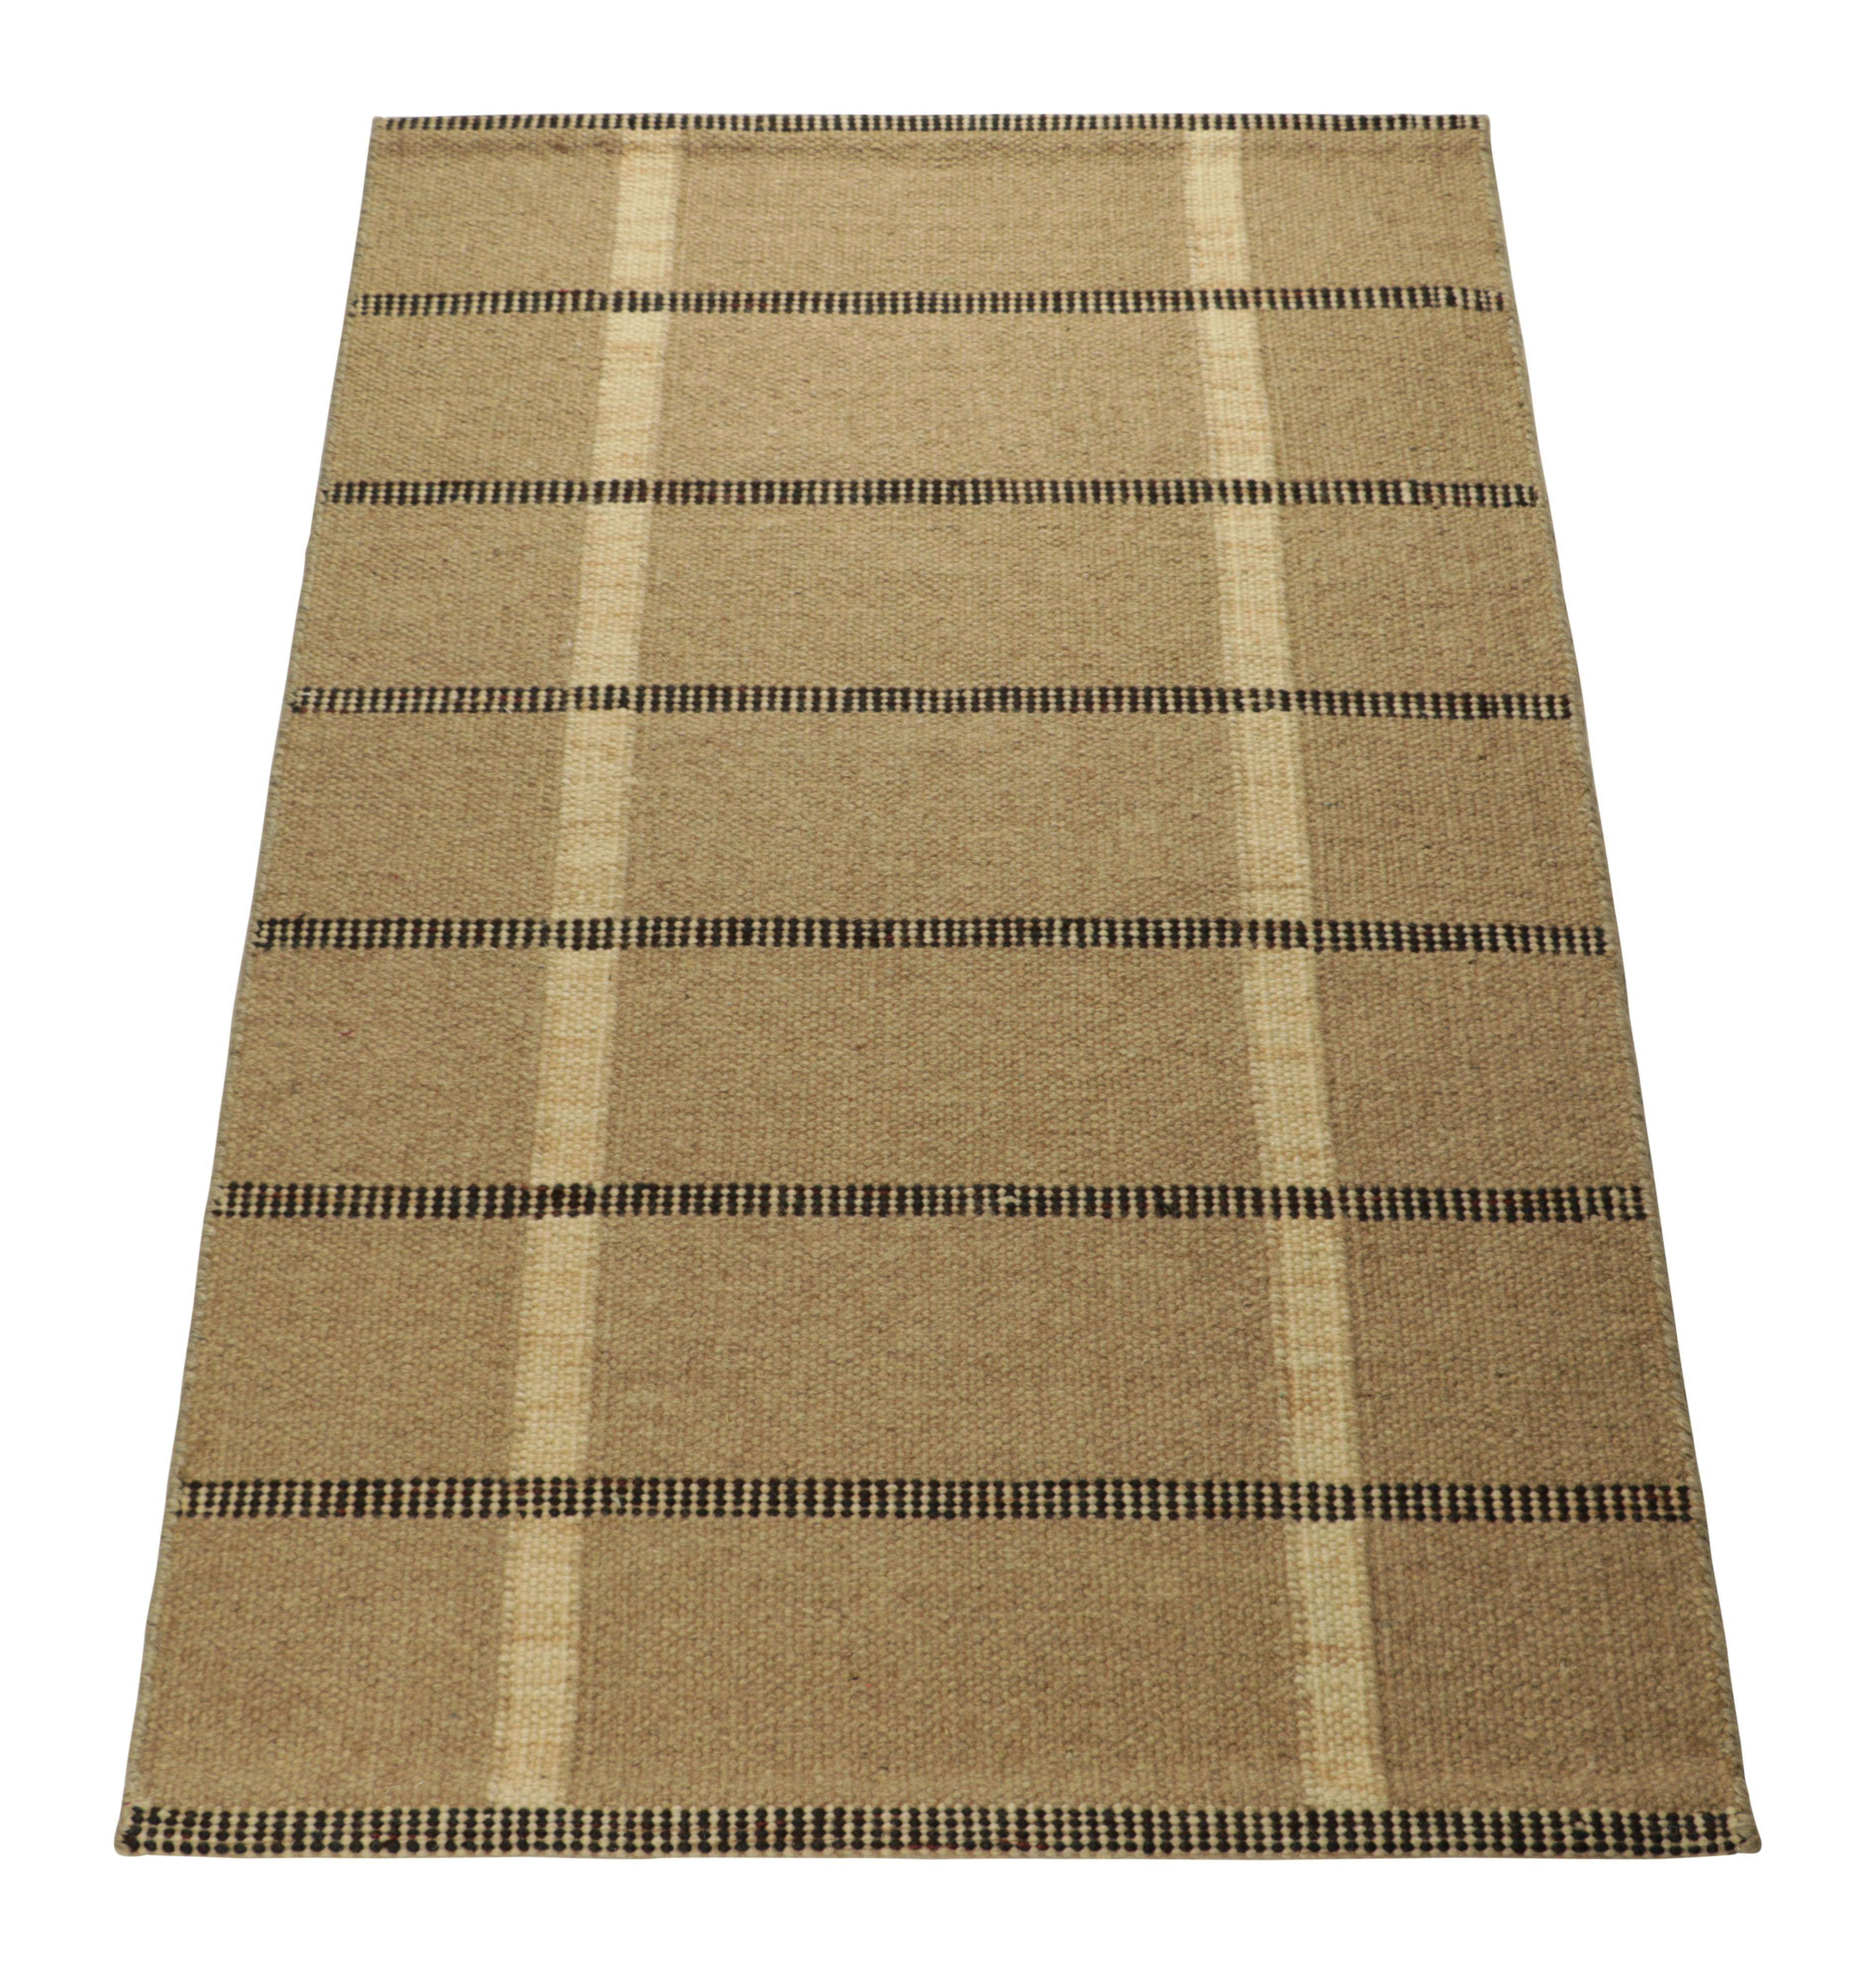 Indian Rug & Kilim’s Scandinavian Style Custom Rug in Beige-Brown, with Stripes For Sale